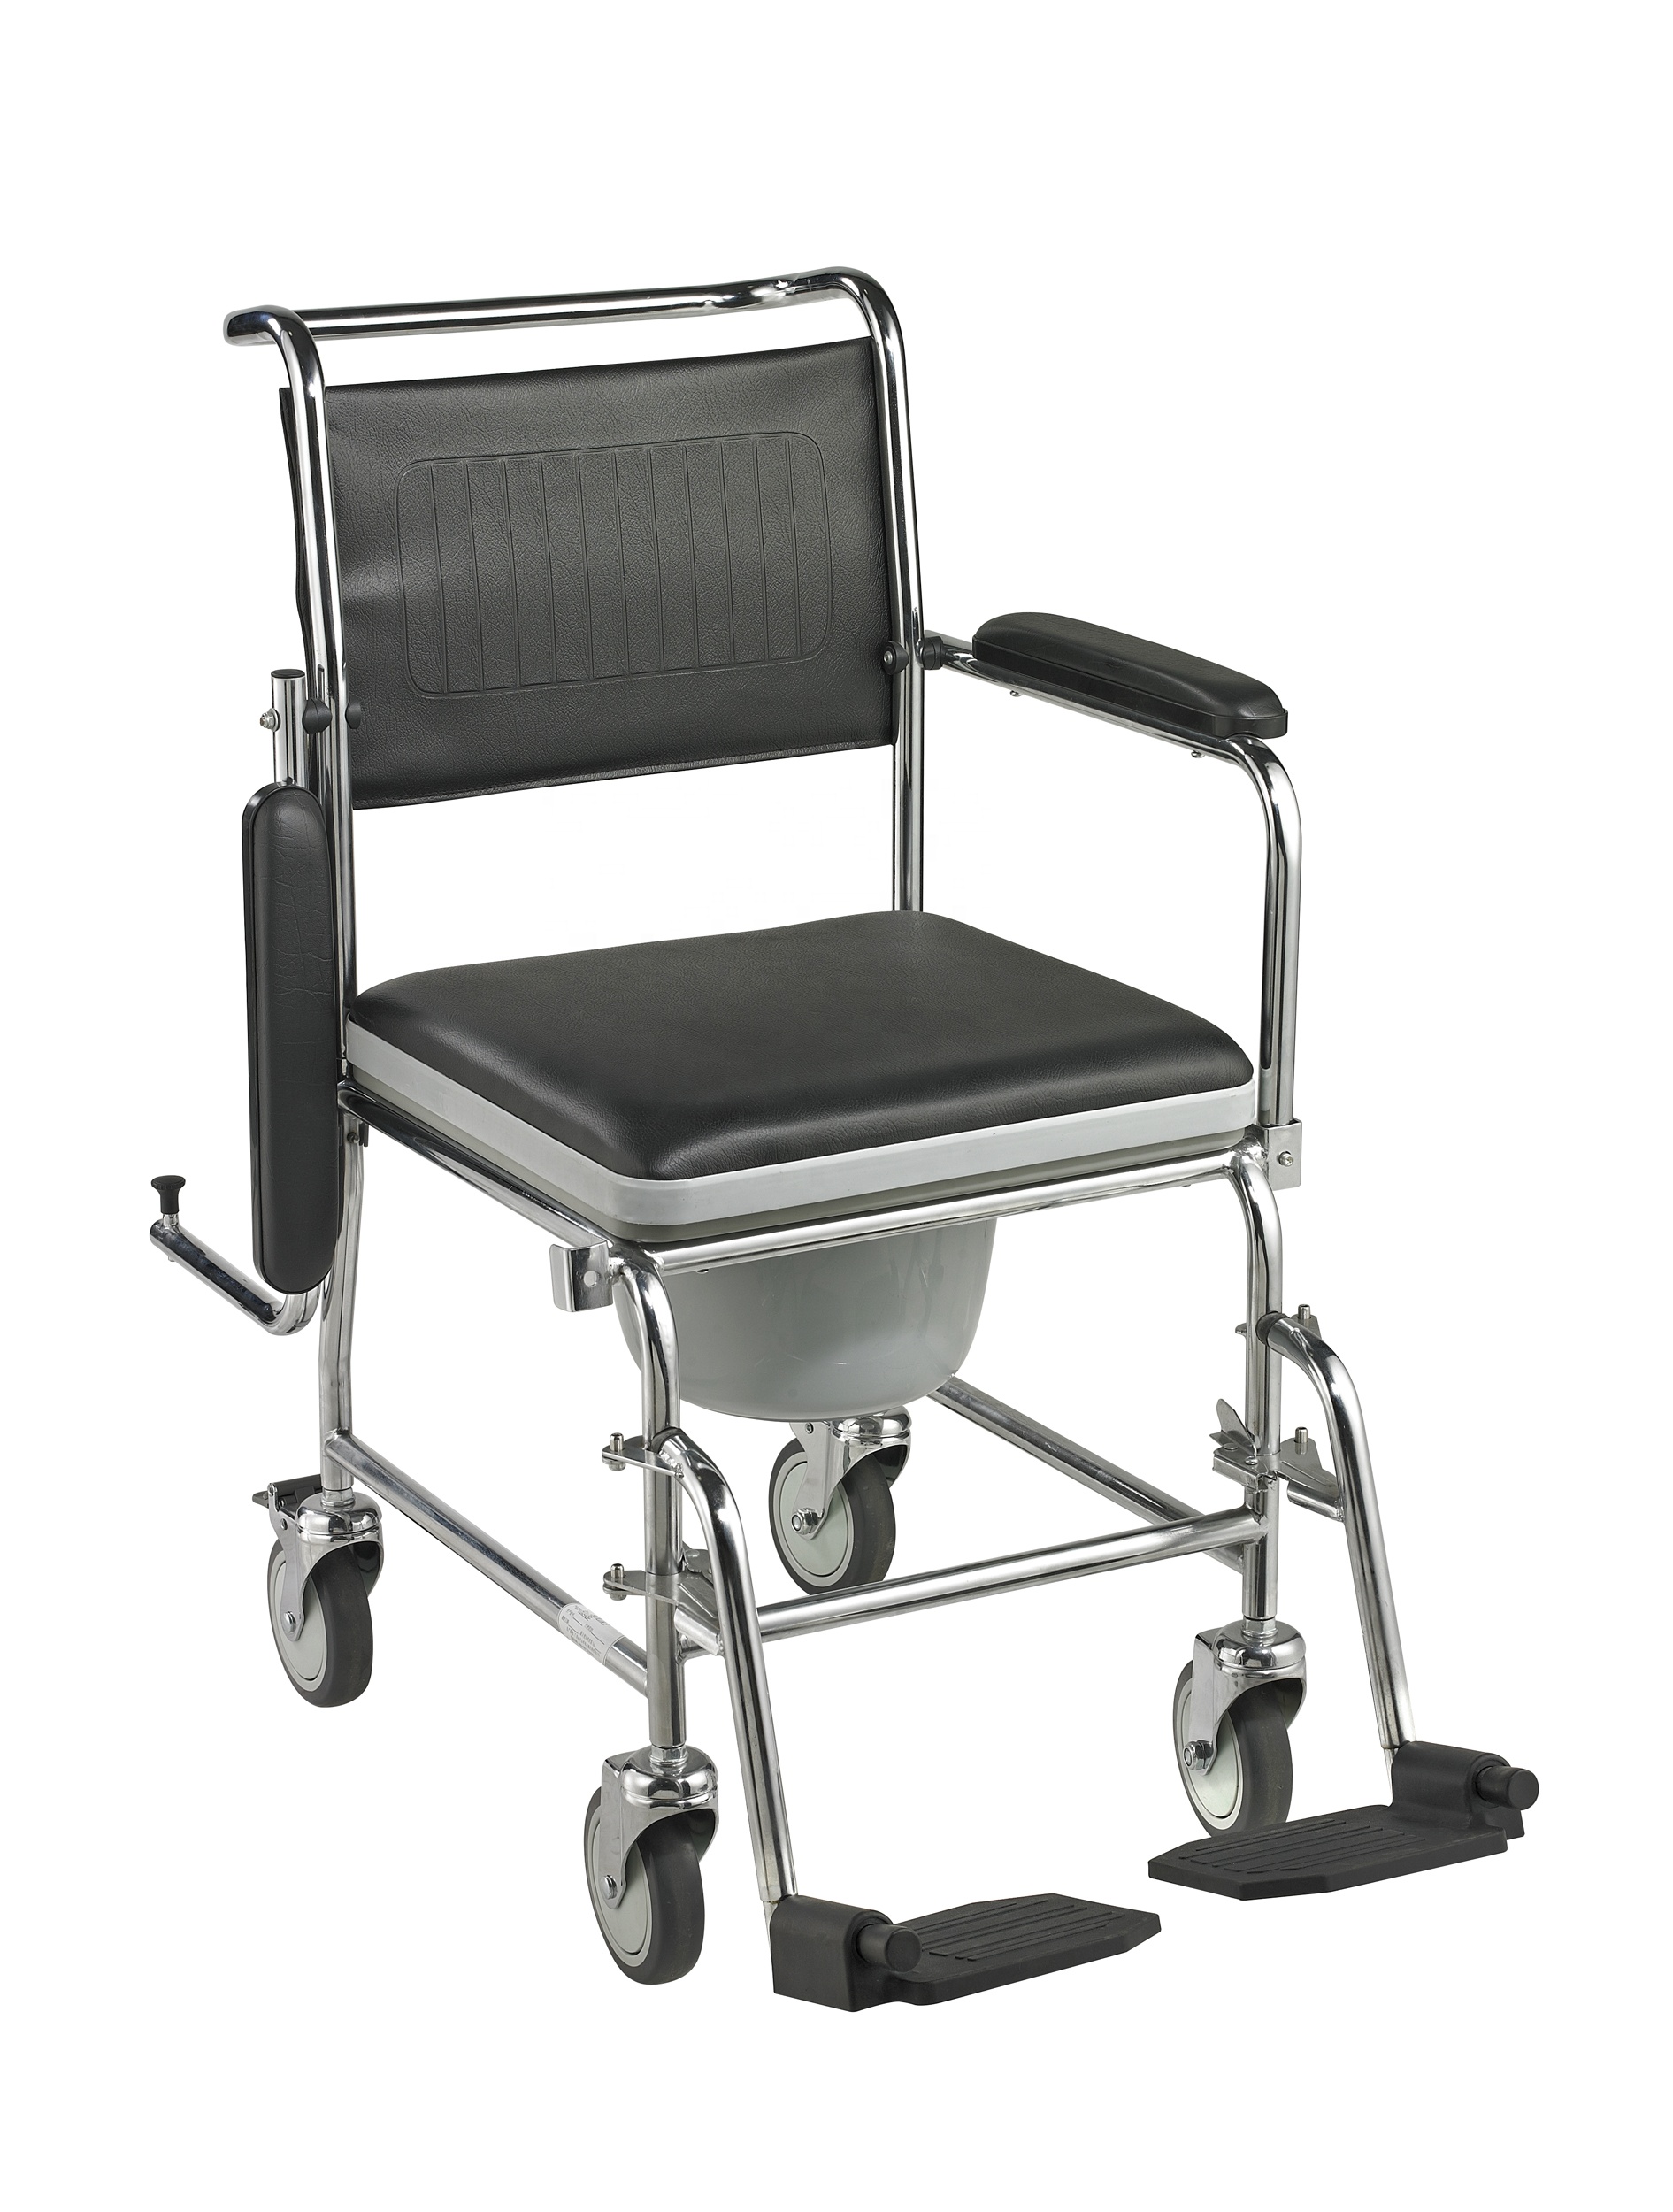 Commode chair for disable person